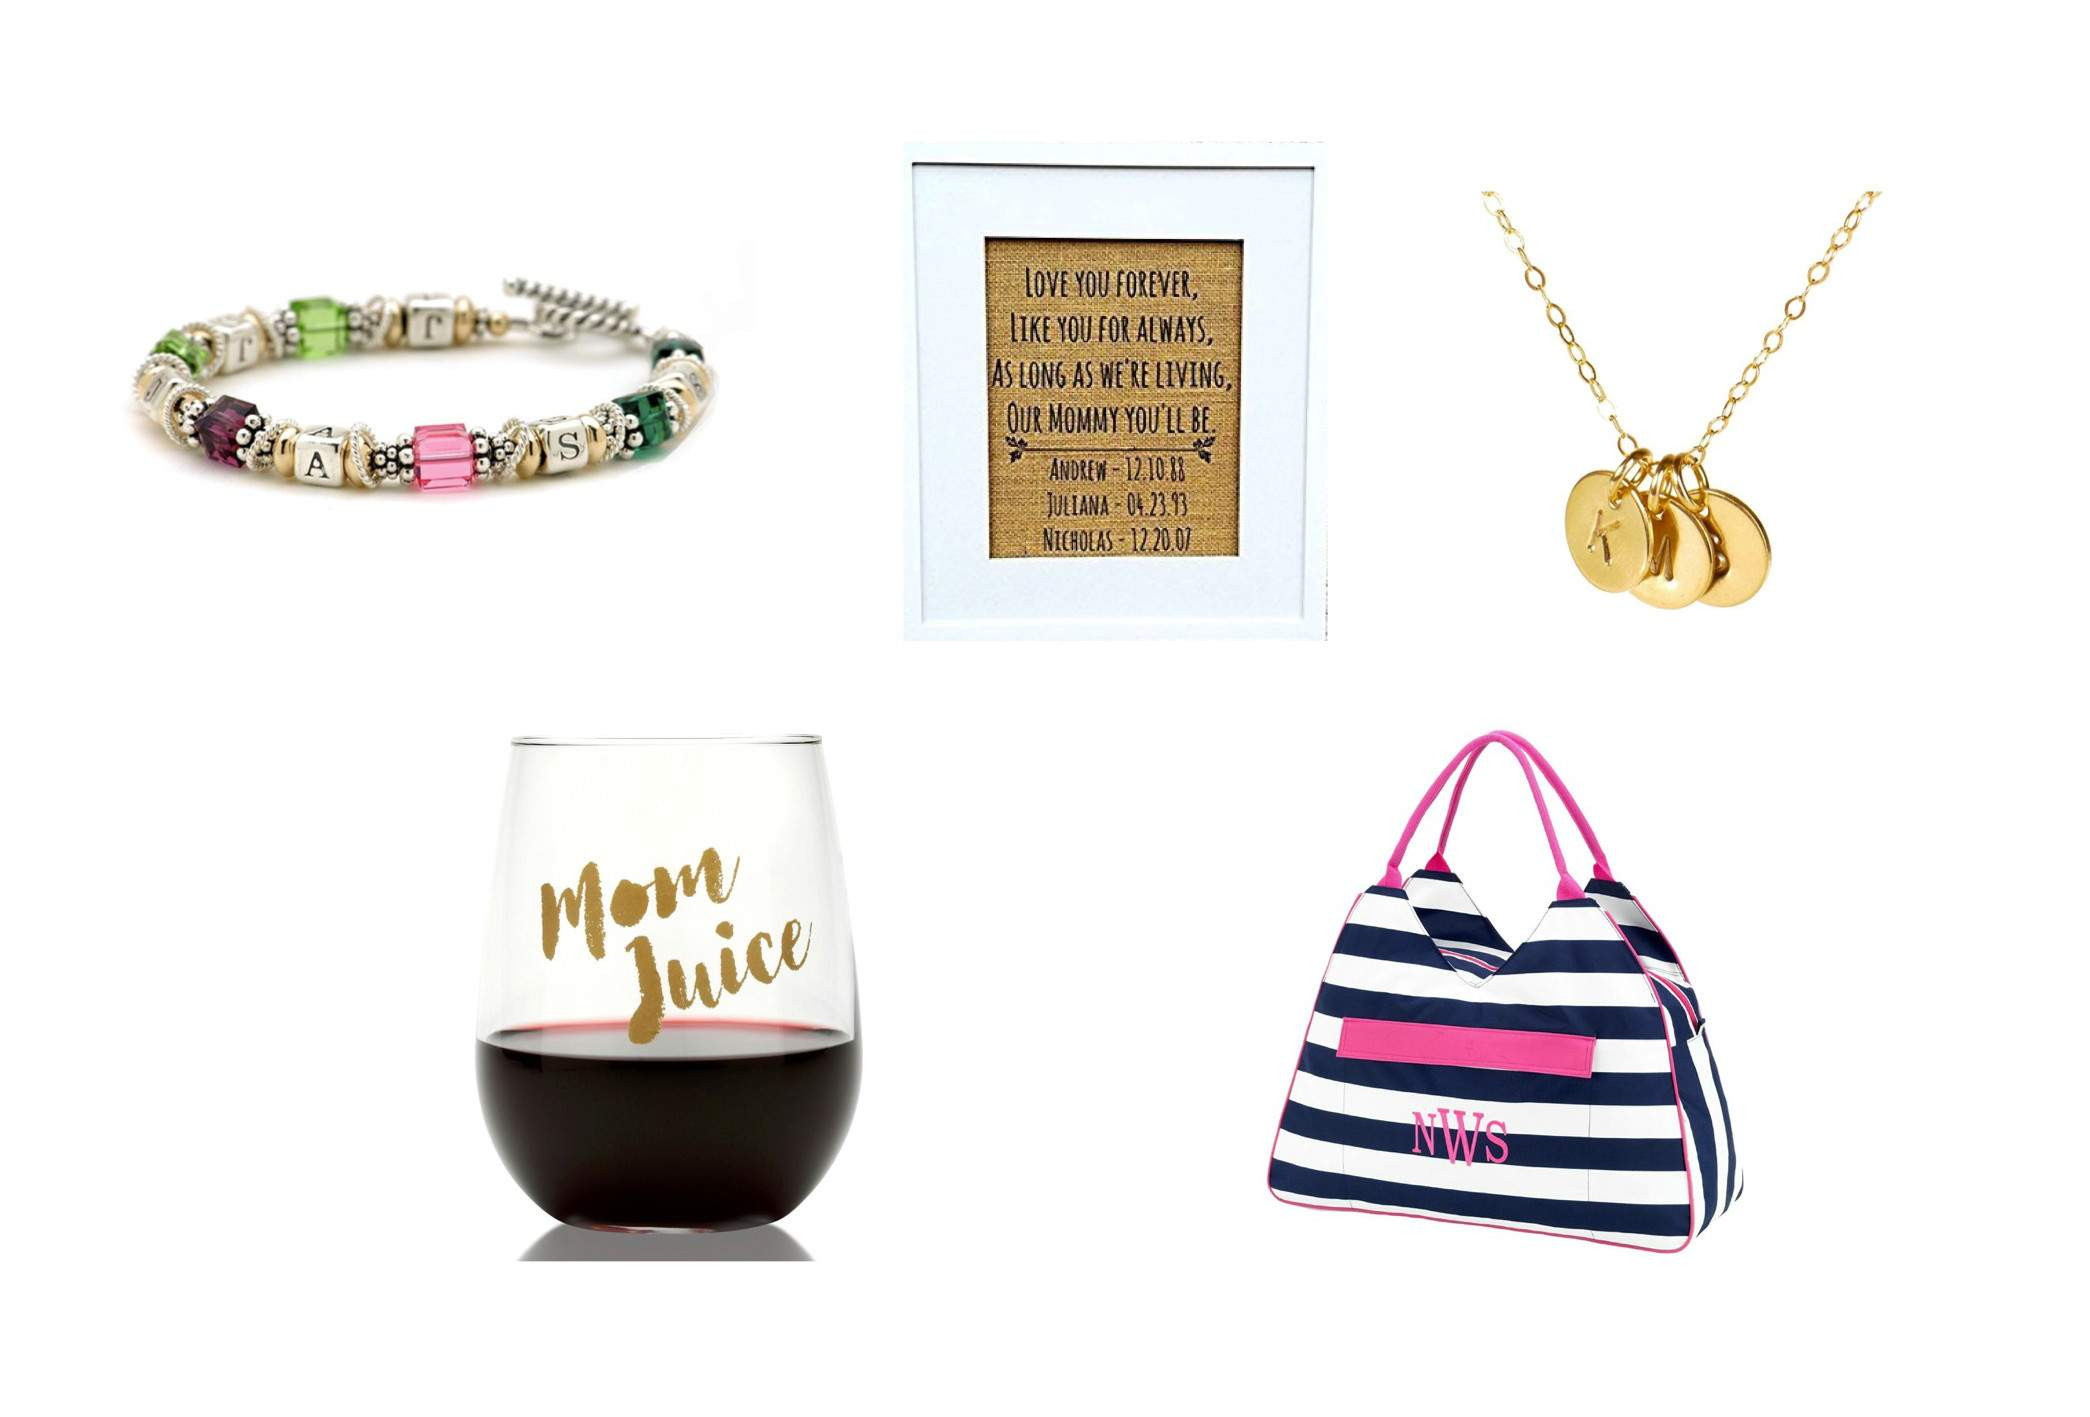 Best Mothers Day Gifts For New Moms
 Top 10 Best Personalized Mother’s Day Gifts for New Moms